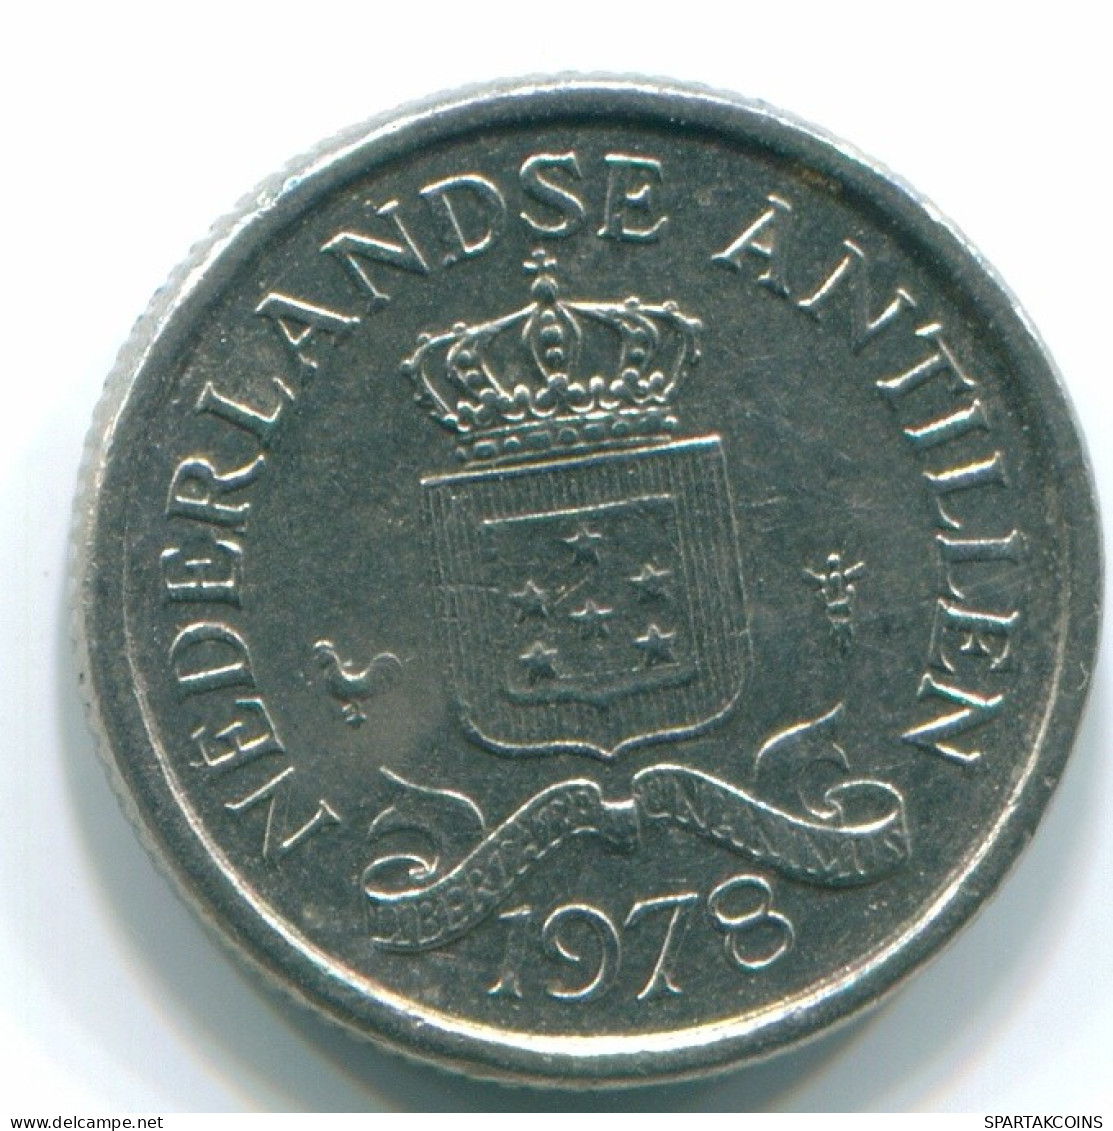 10 CENTS 1978 NETHERLANDS ANTILLES Nickel Colonial Coin #S13544.U.A - Netherlands Antilles